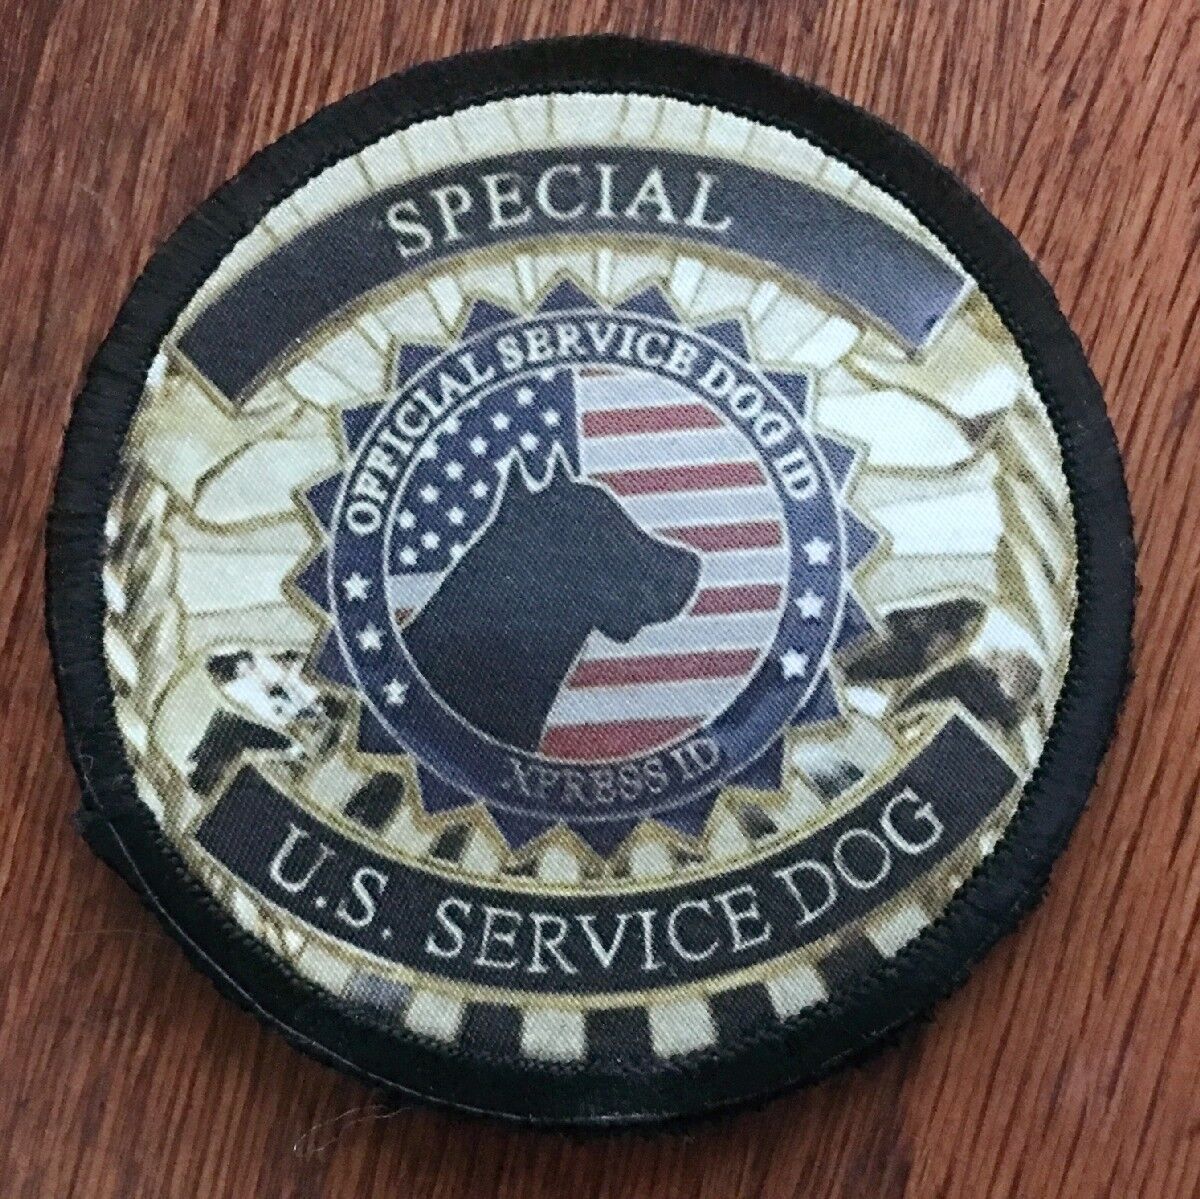 K-9 Special U.S.Service Dog Morale Patch ARMY MILITARY  ISAF ATTACK DOGS OF WAR 